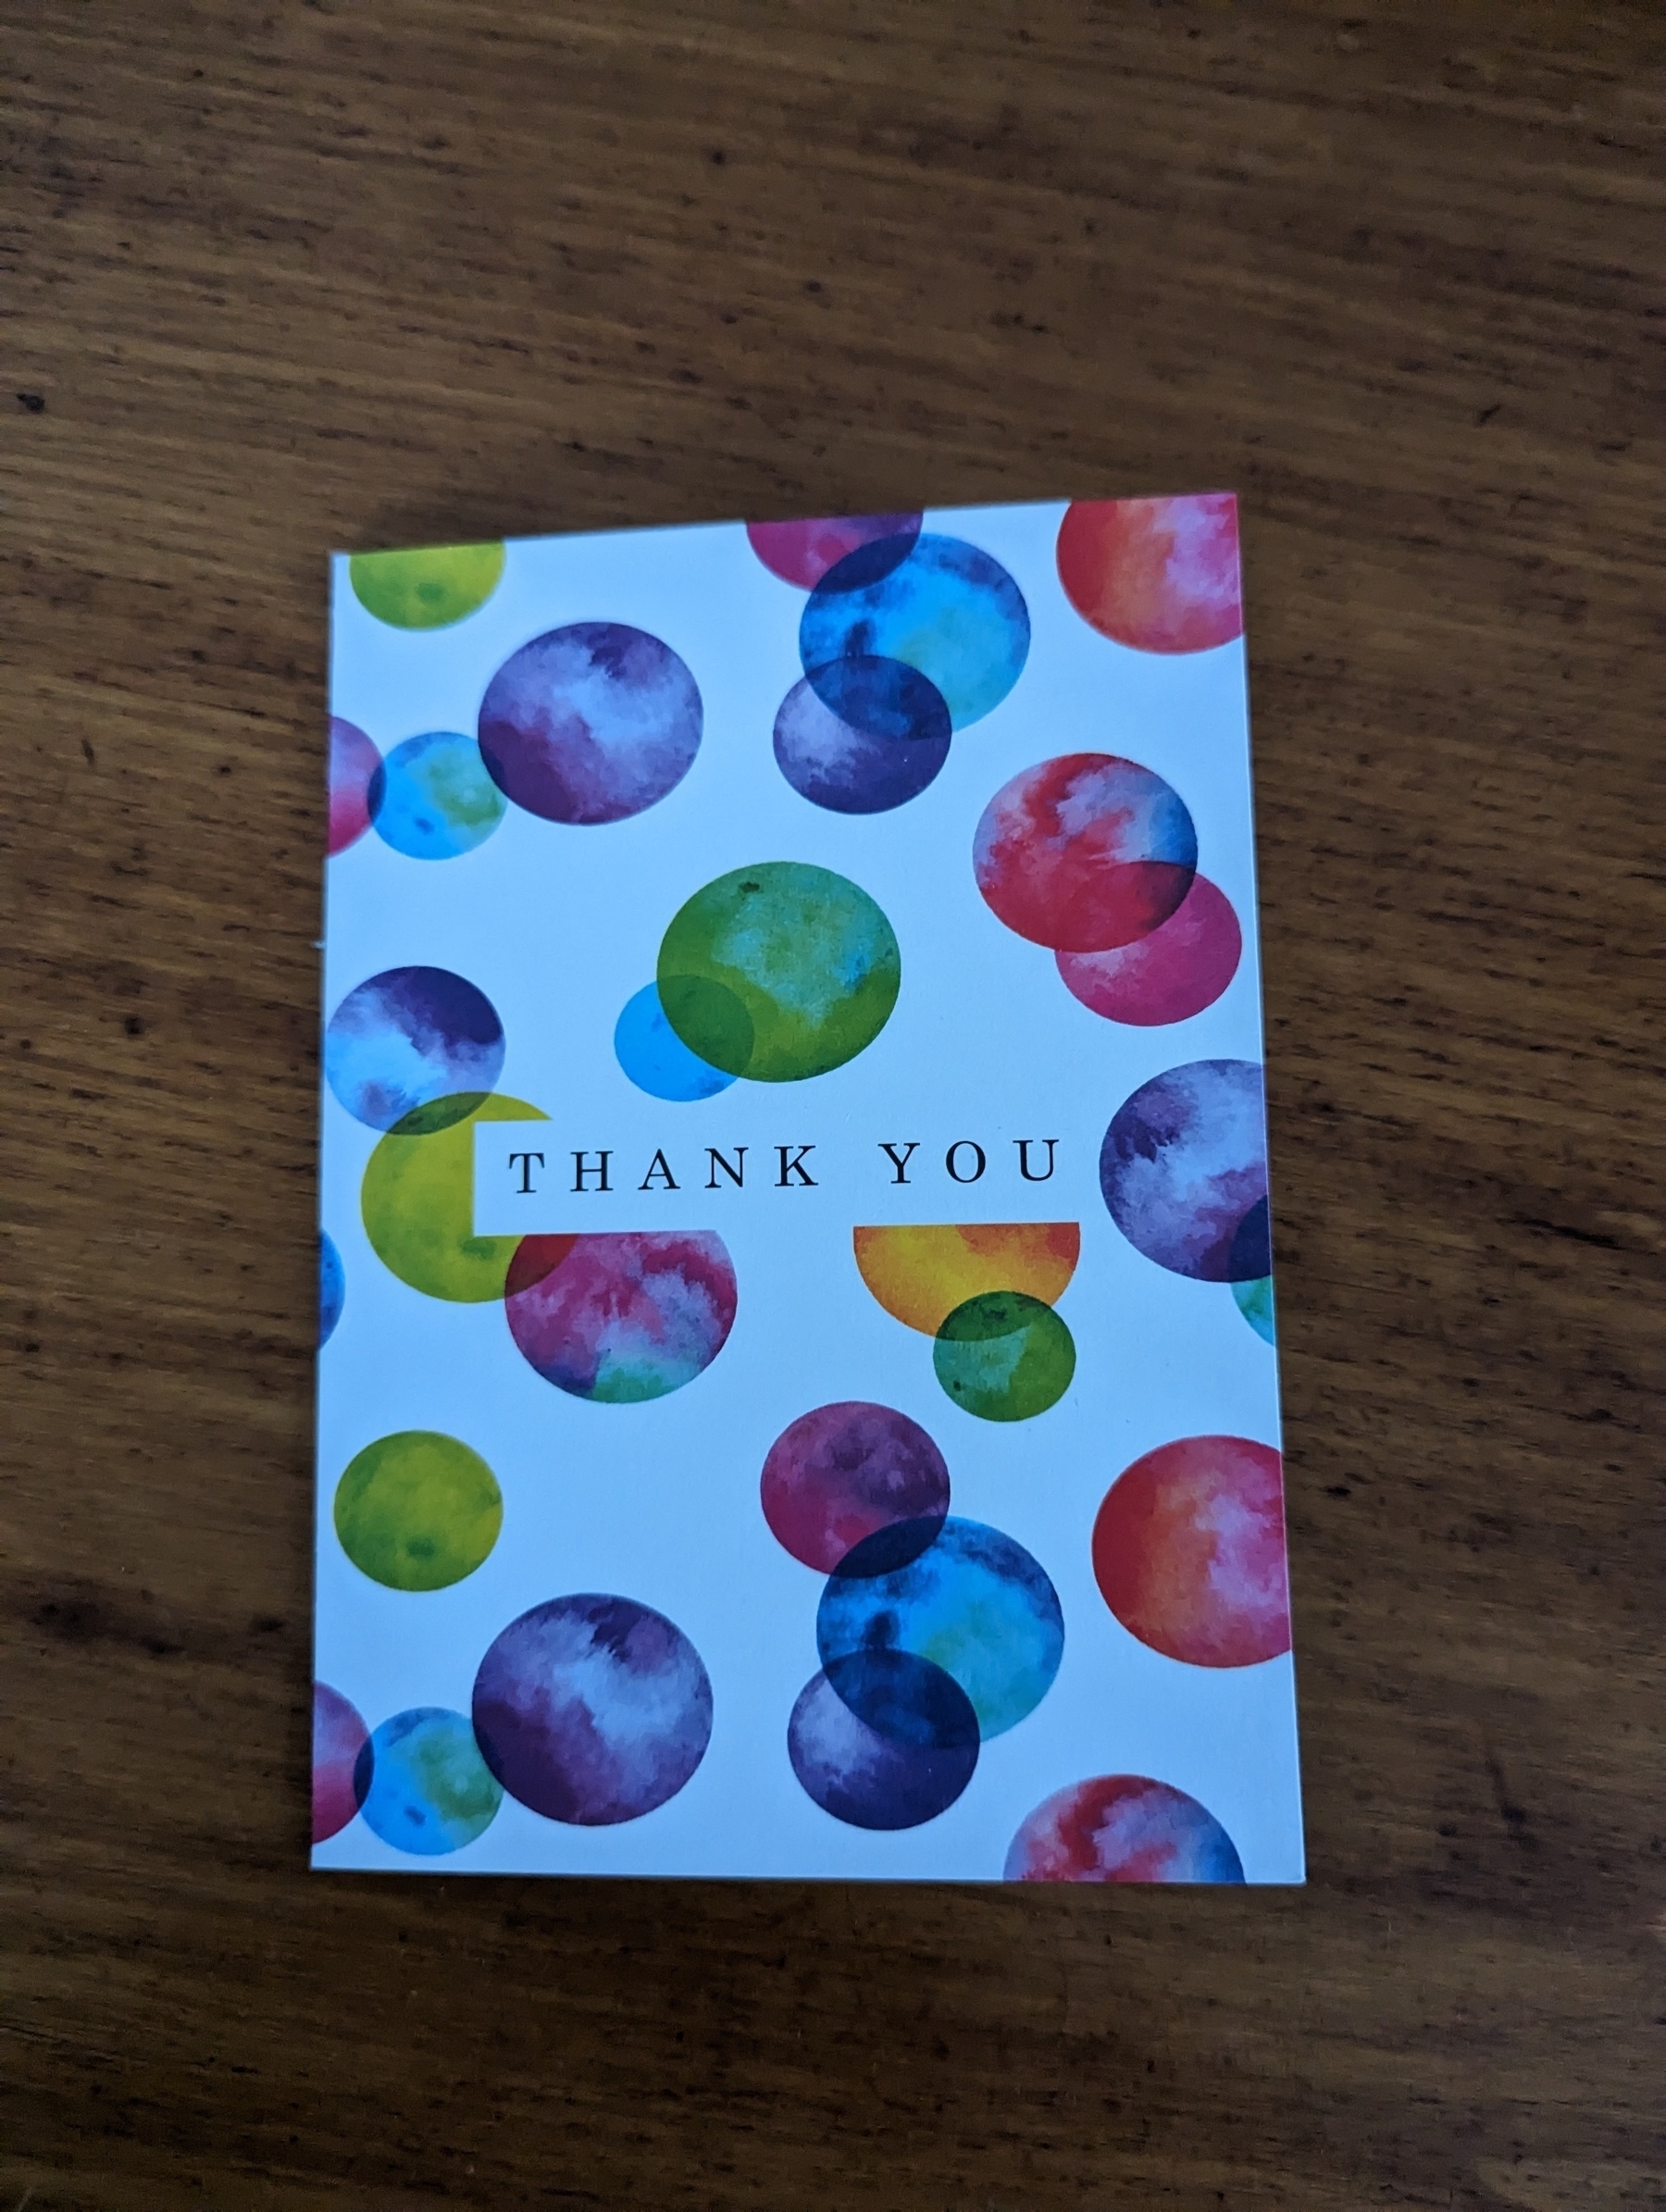 A Thank You card with coloured balloons printed on the front, on a wooden table.